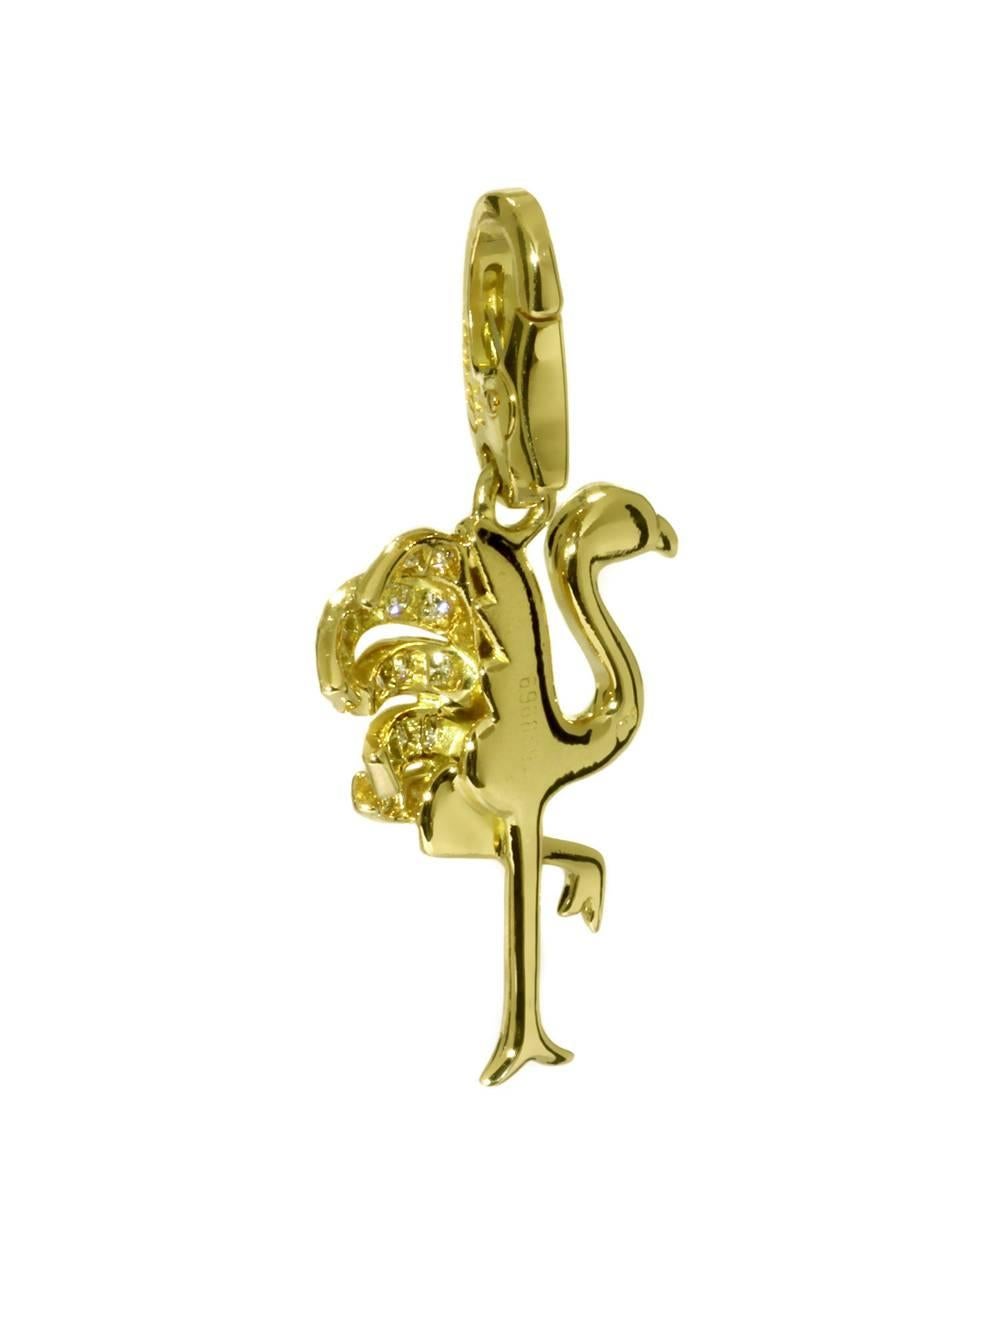 An extremely rare Cartier Flamingo pendant/ charm charm set with the finest Cartier round brilliant cut diamonds in 18k yellow gold.

Dimensions: 15mm wide (.59″ Inches) by 31mm (1.22″ Inches) in length

Inventory ID: 0000110